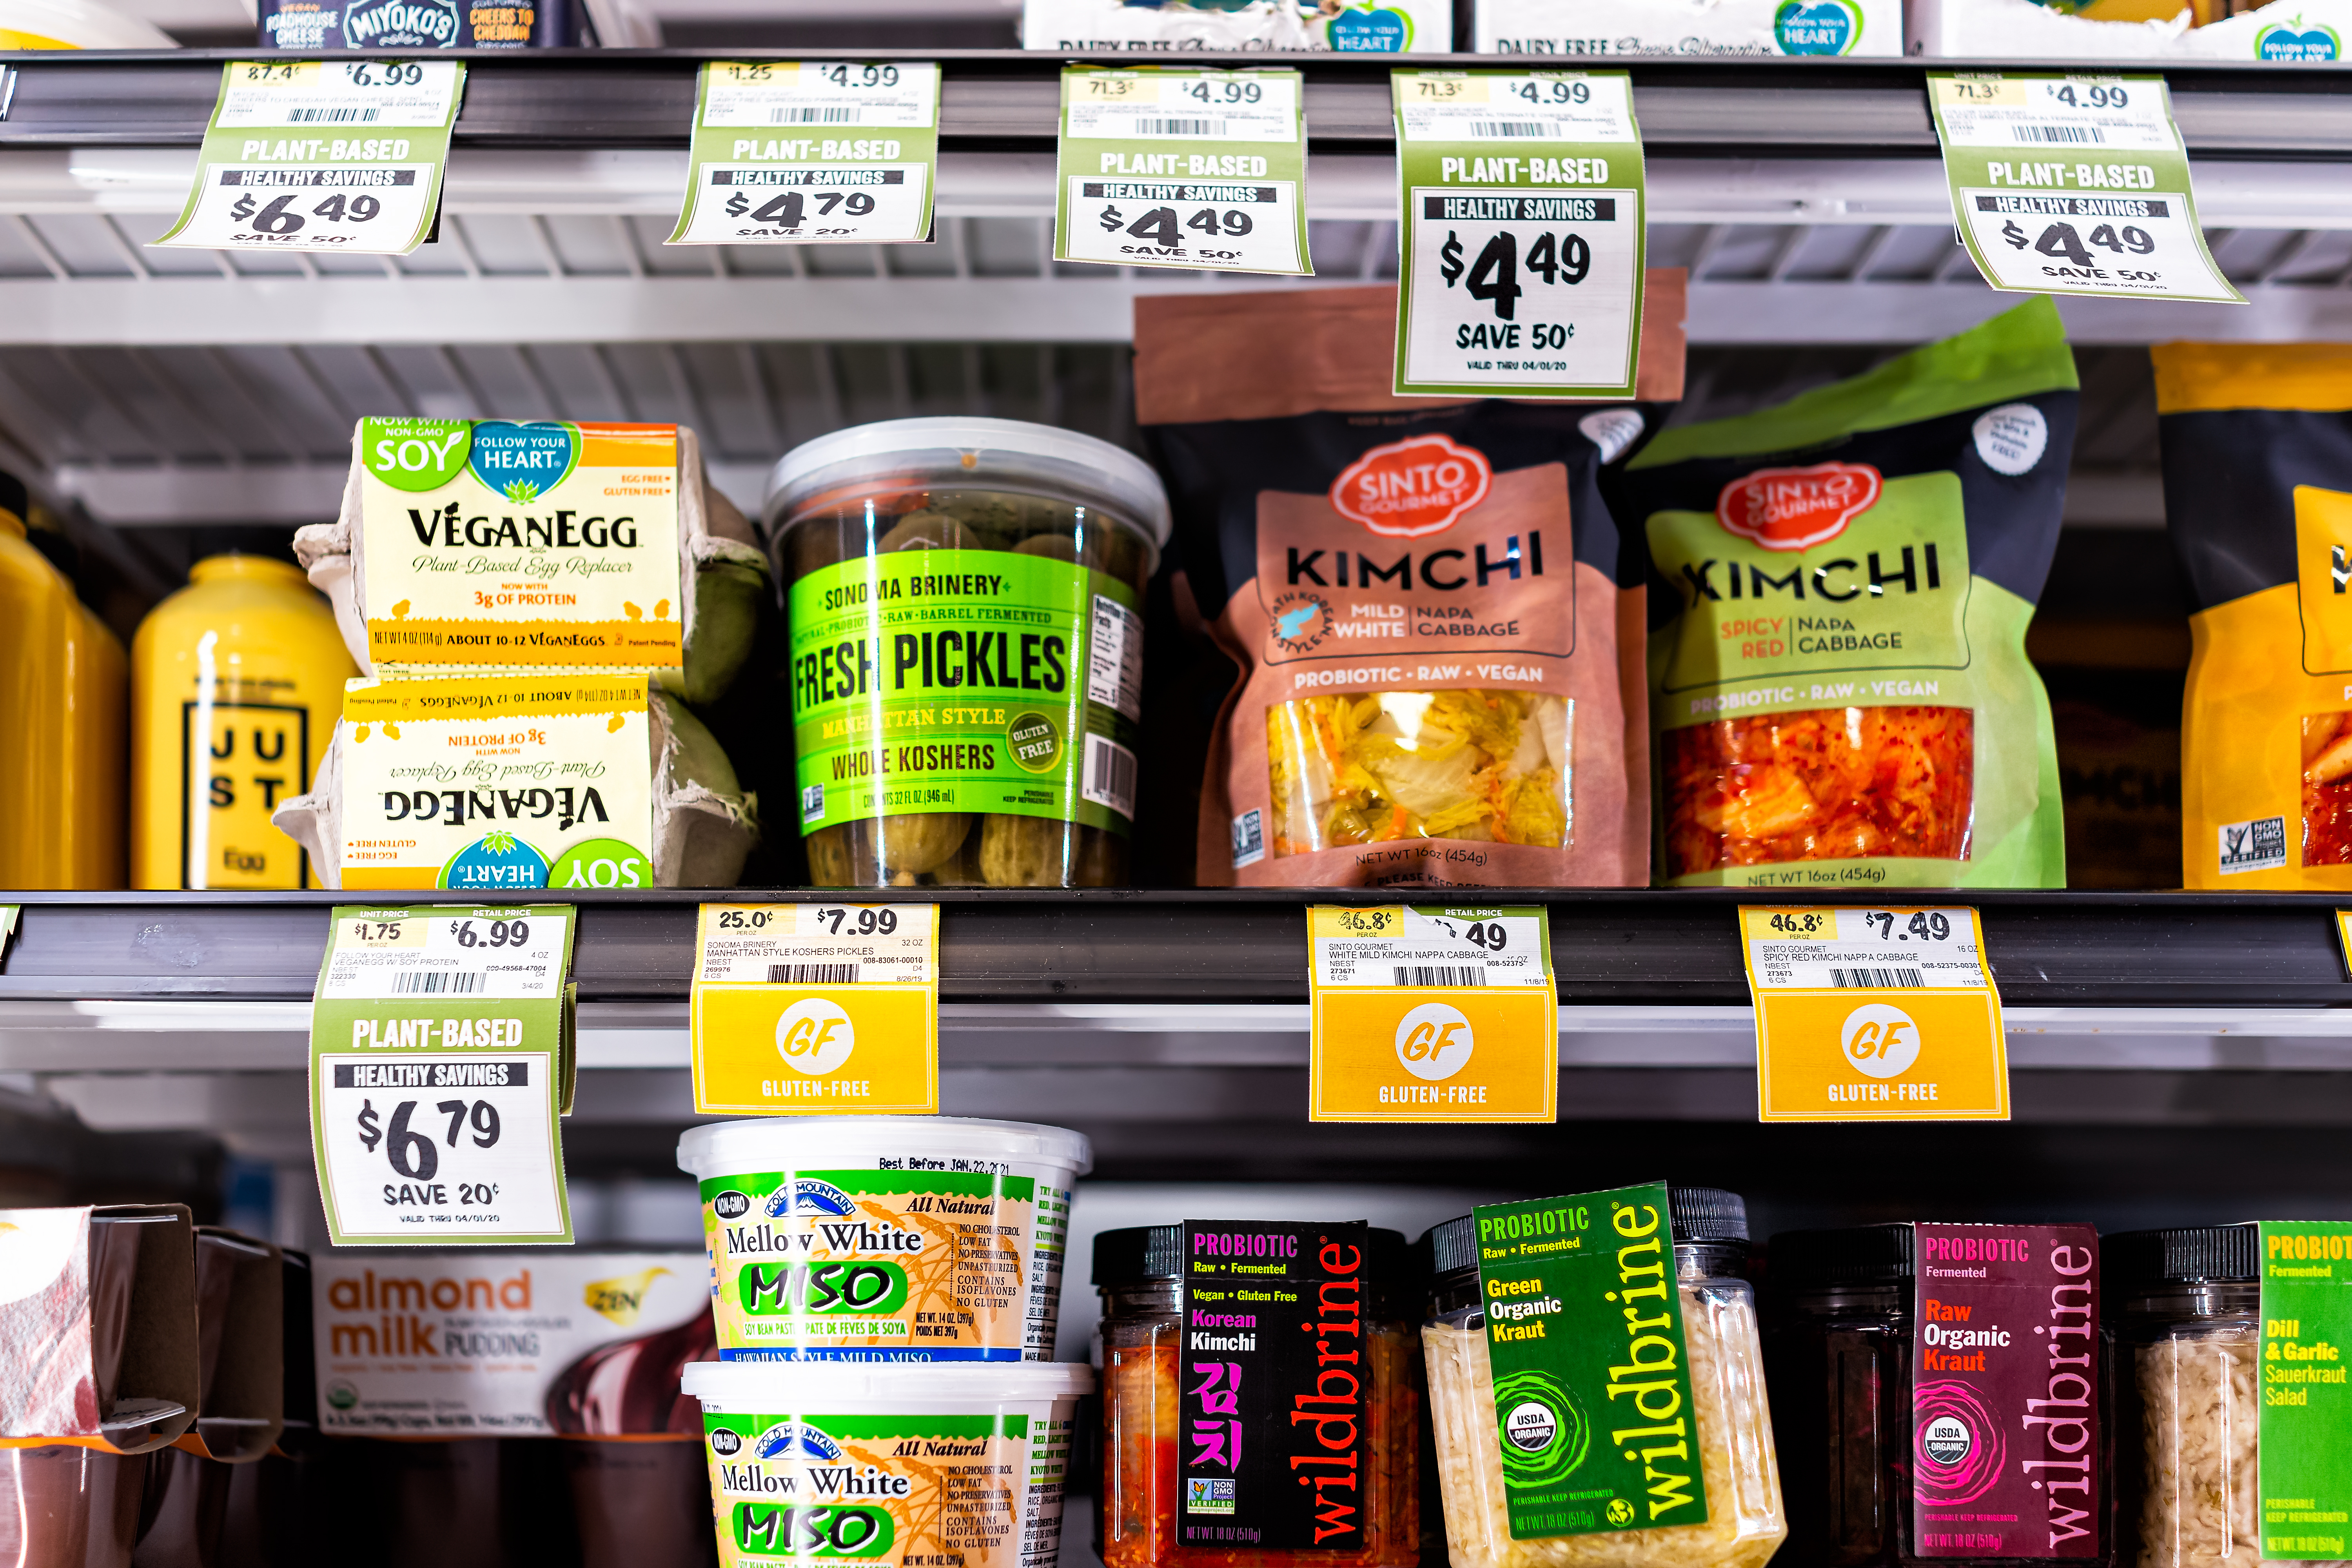 Evaluating the plant-based retail market in the US